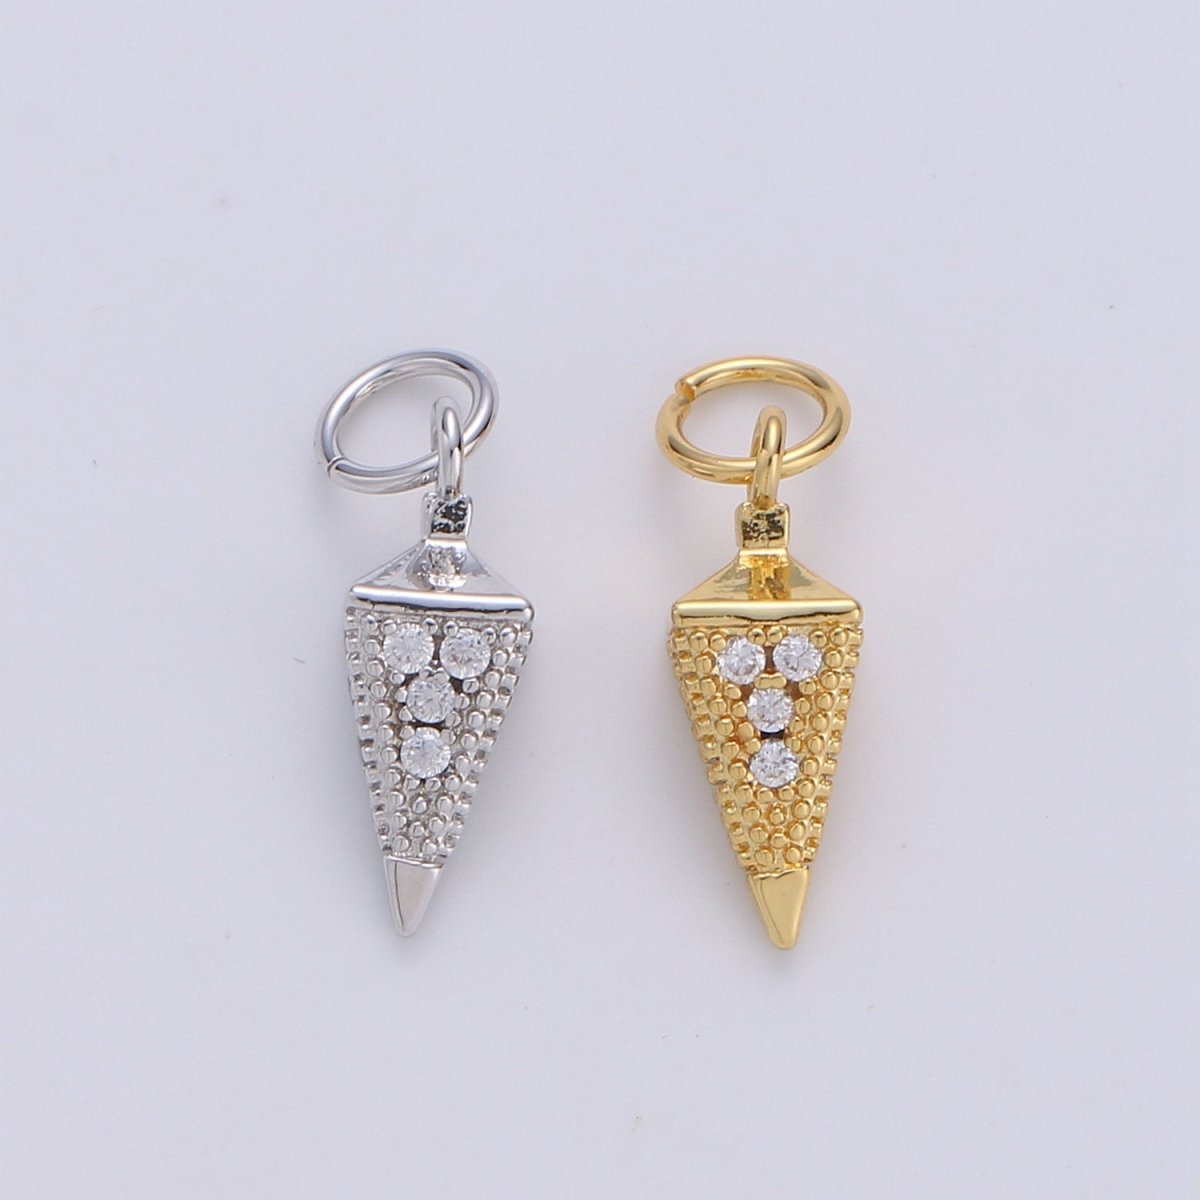 Tiny Pendulum charm 24k gold Filled Spike Jewelry making, Gold Filled Jewelry component Stud Charm for Bracelet Earring Necklace Supply D-260 D-261 - DLUXCA